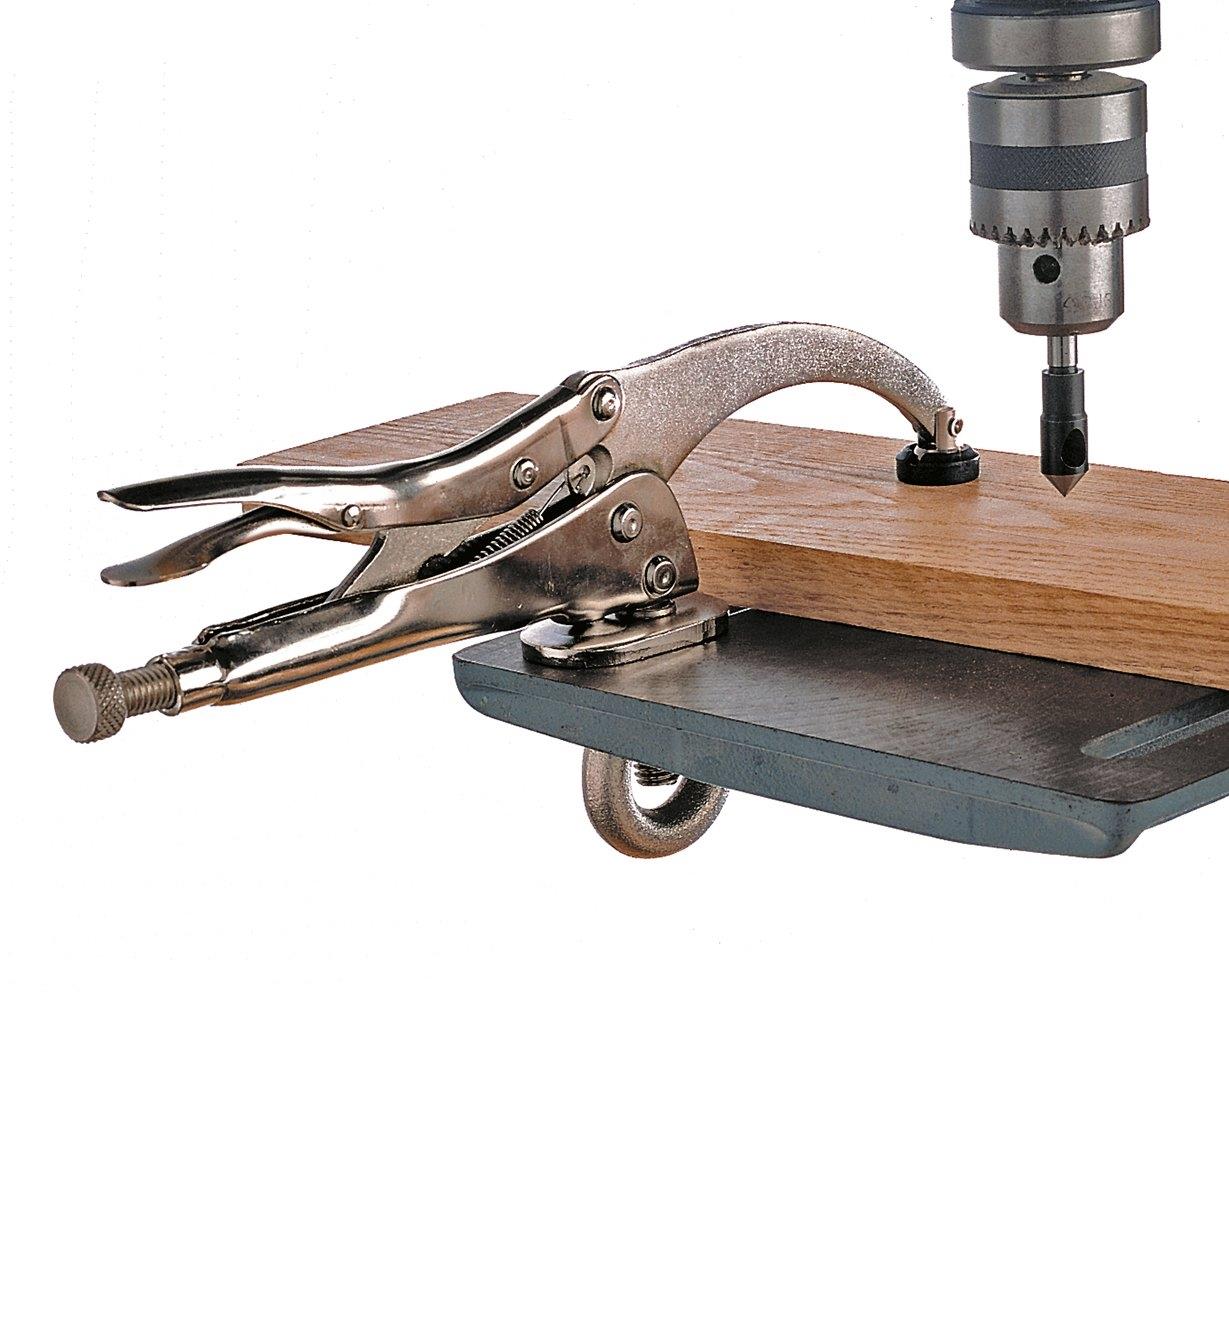 Vise Clamp holding a board on a drill-press table